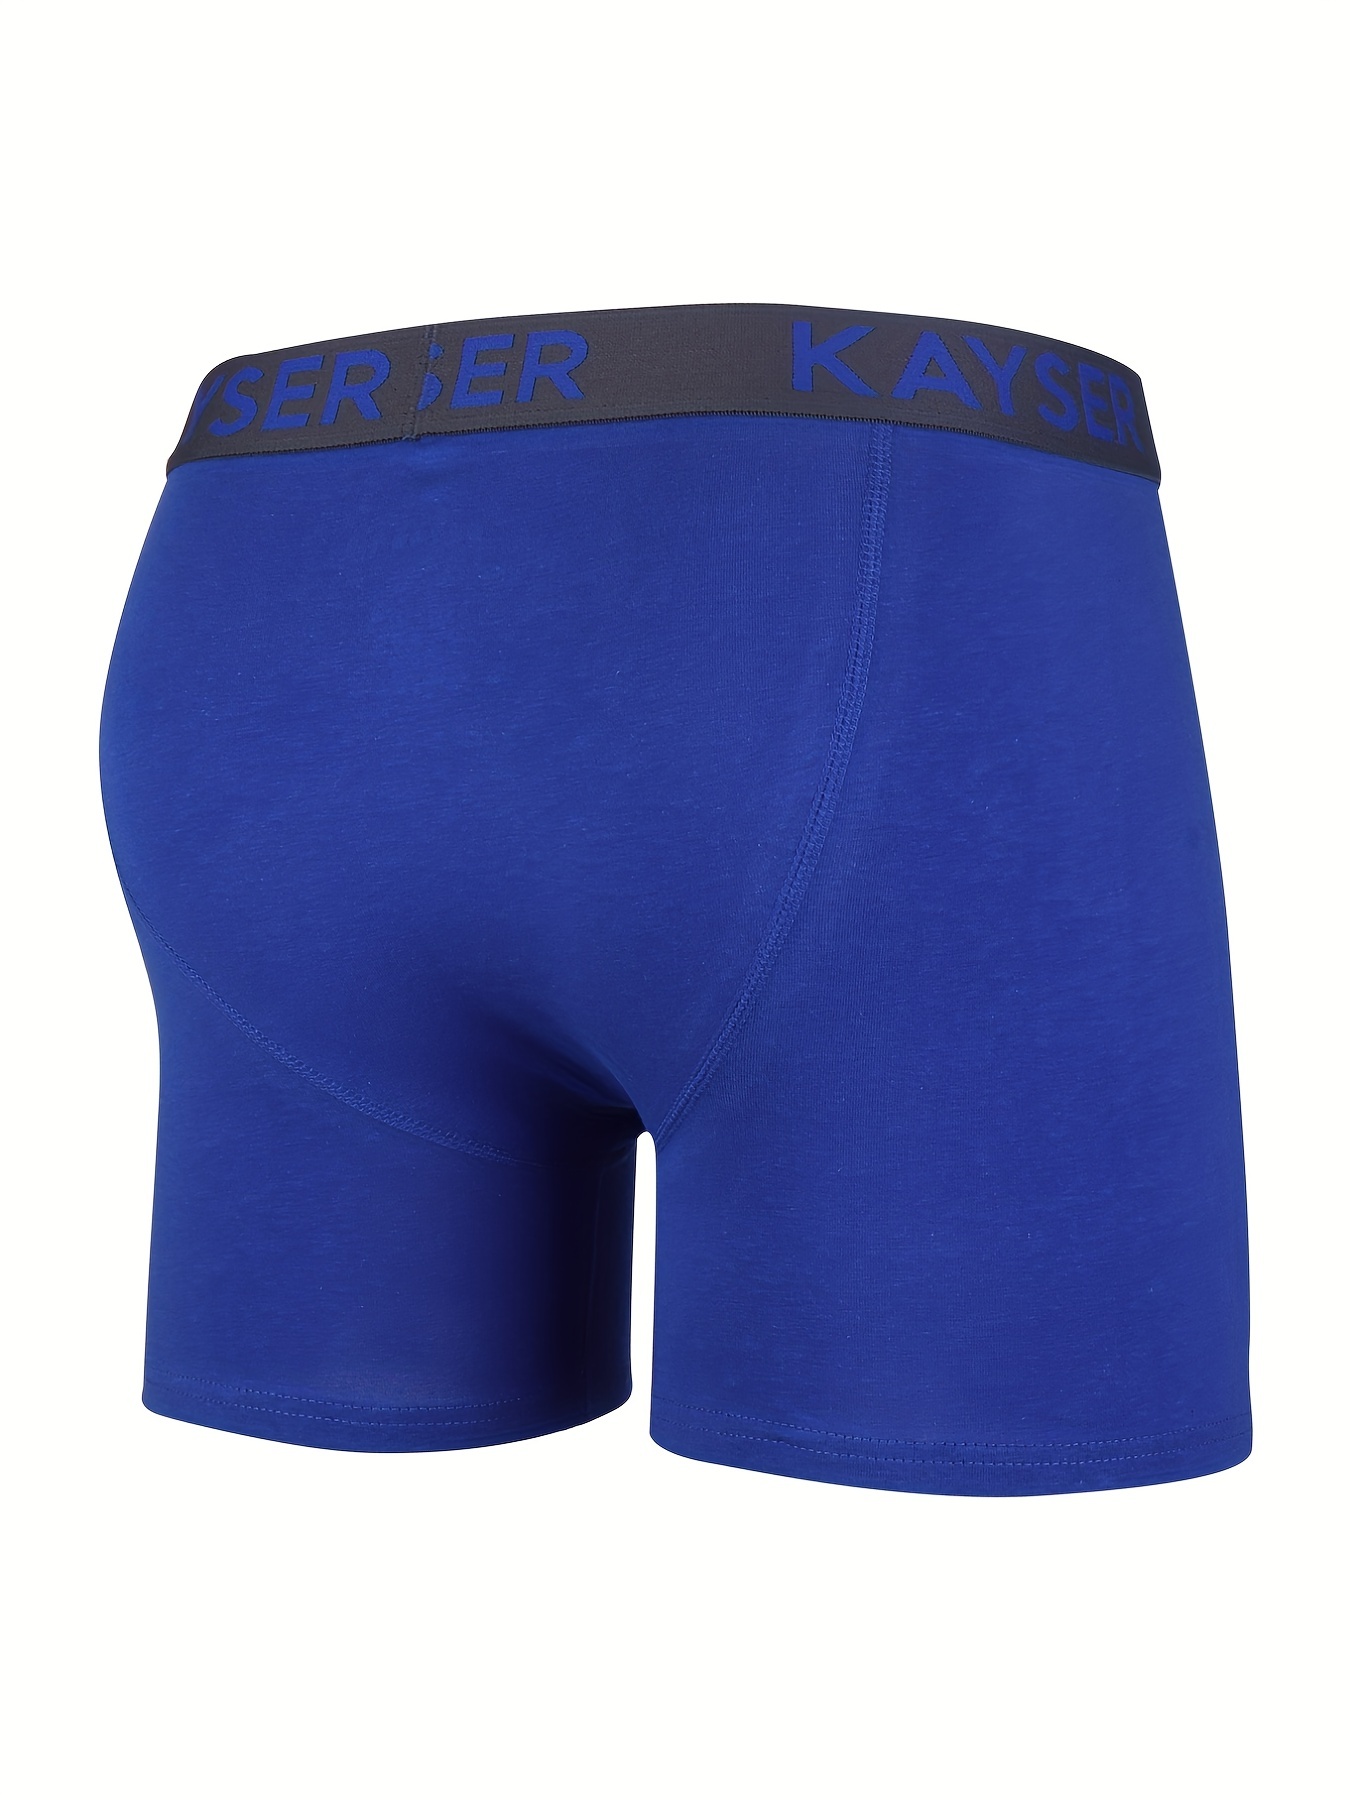 GQ Men Underwar 150-101063-17- is designed to provide maximum comfort and  support, stylish design and comfortable fit